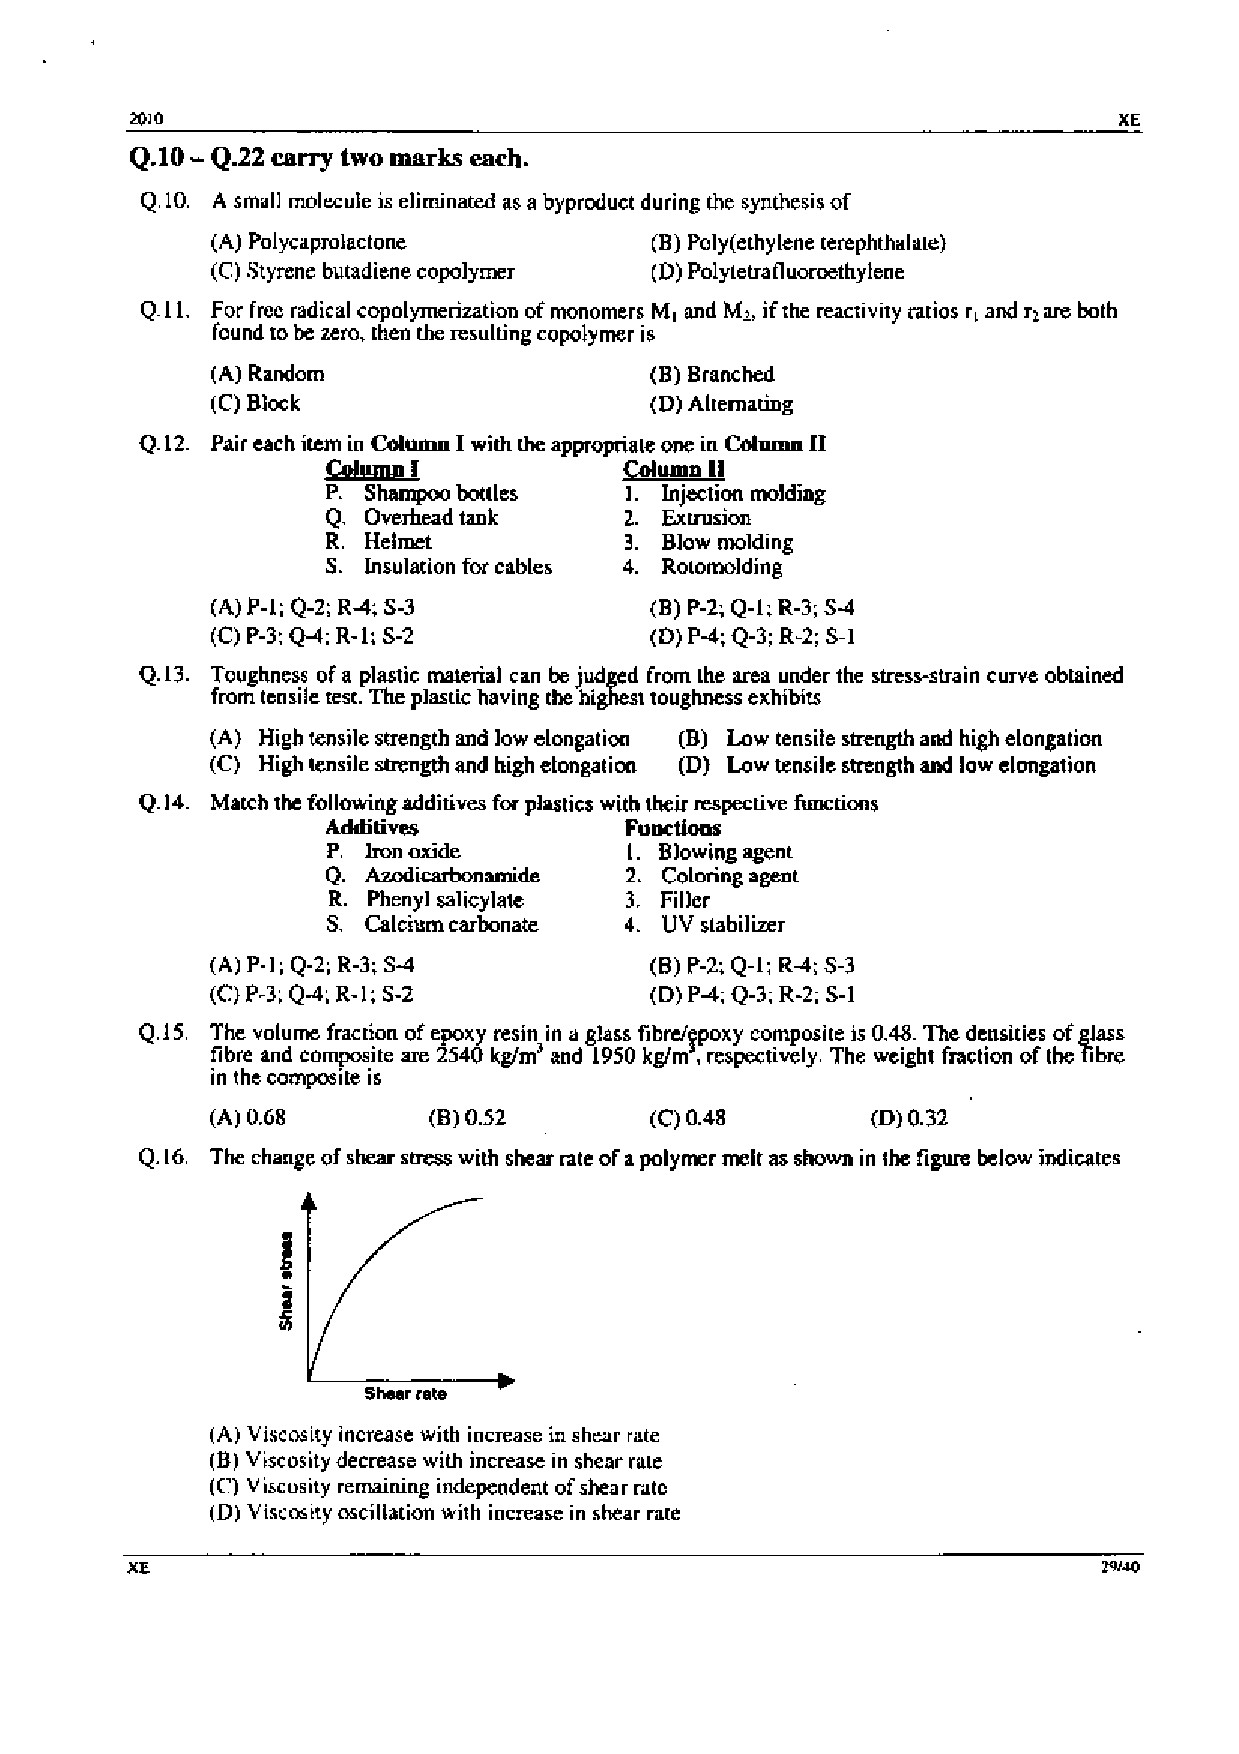 GATE Exam Question Paper 2010 Engineering Sciences 29